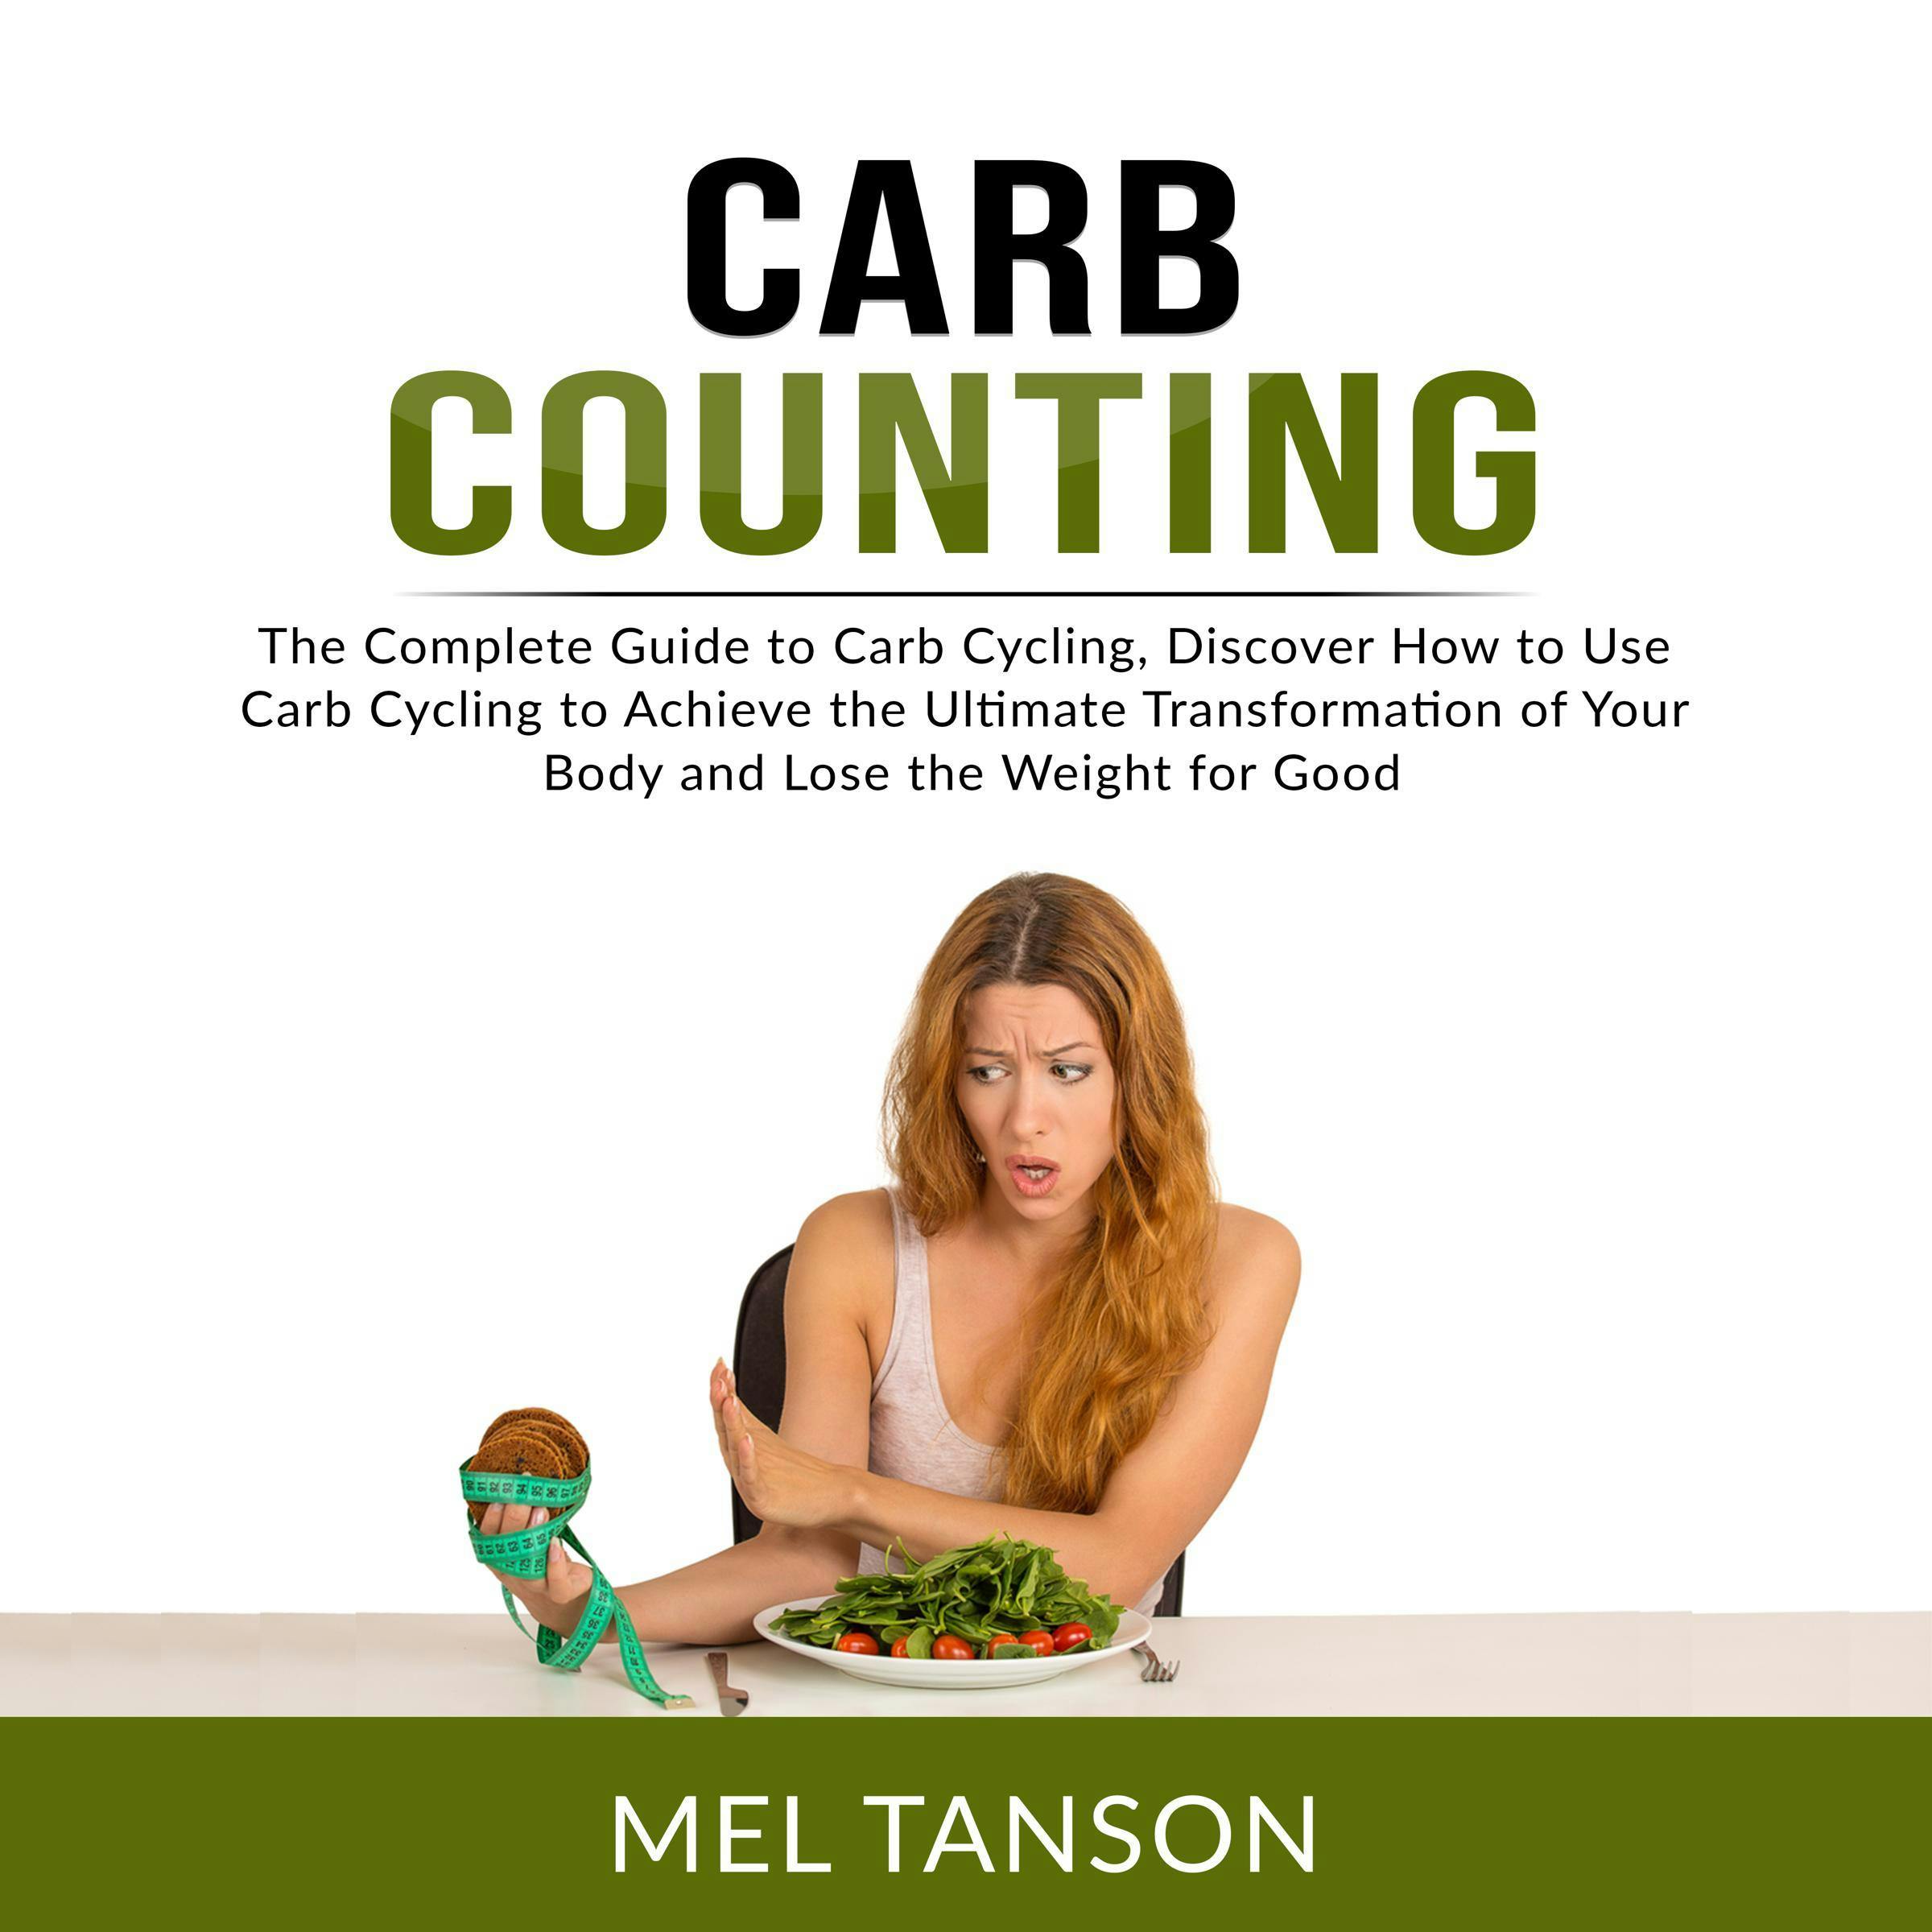 Carb Counting: The Complete Guide to Carb Cycling, Discover How to Use Carb Cycling to Achieve the Ultimate Transformation of Your Body and Lose the Weight for Good - undefined